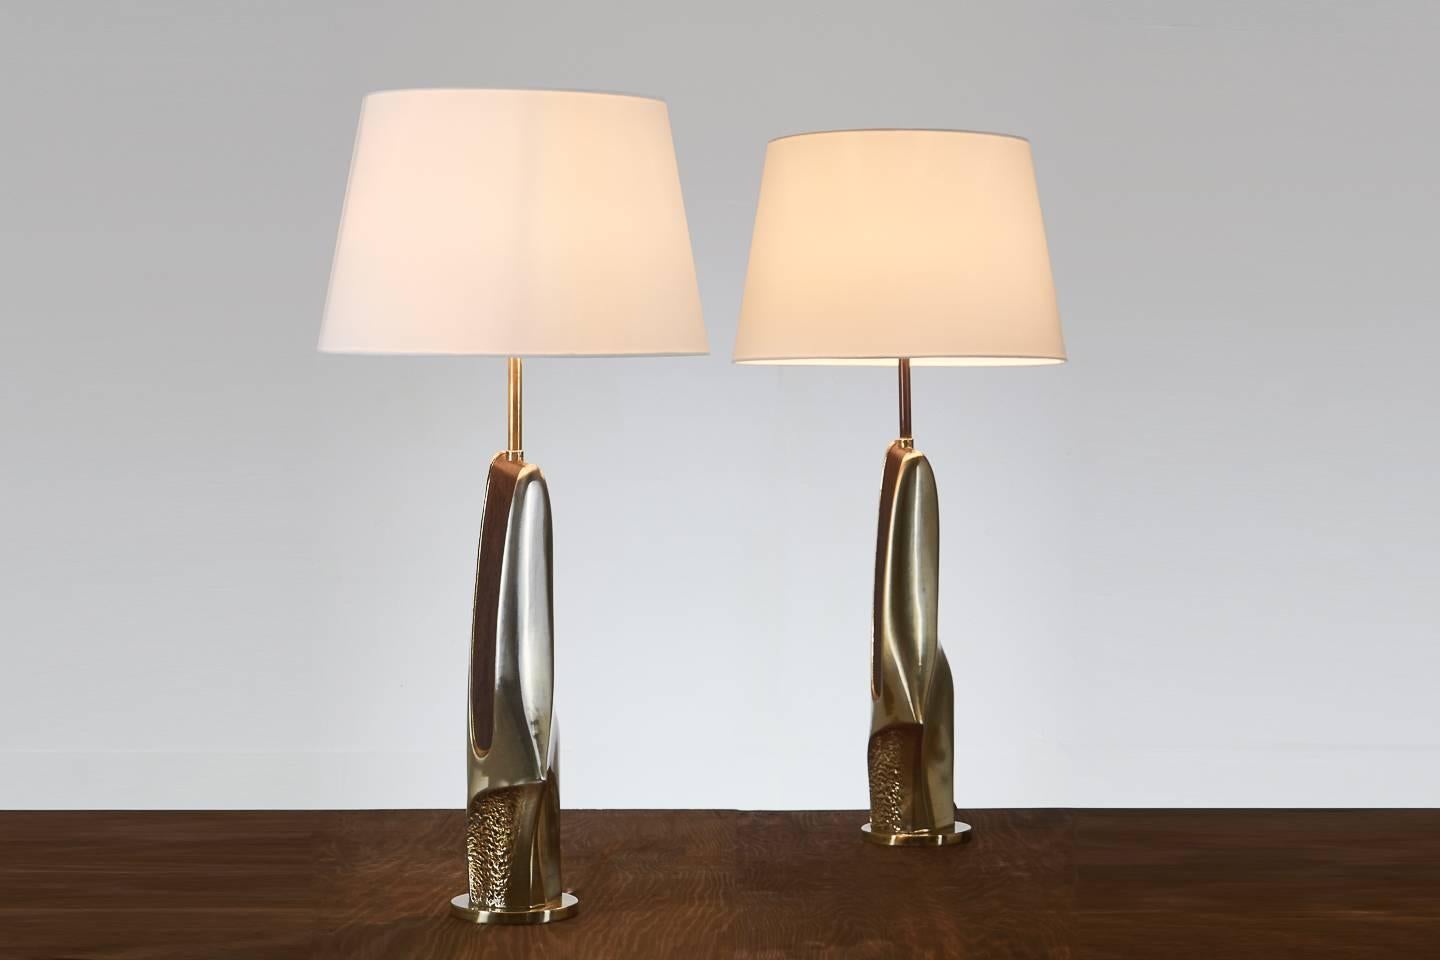 Pair of 1960s American Brutalist sculptural brass and wood table lamps.